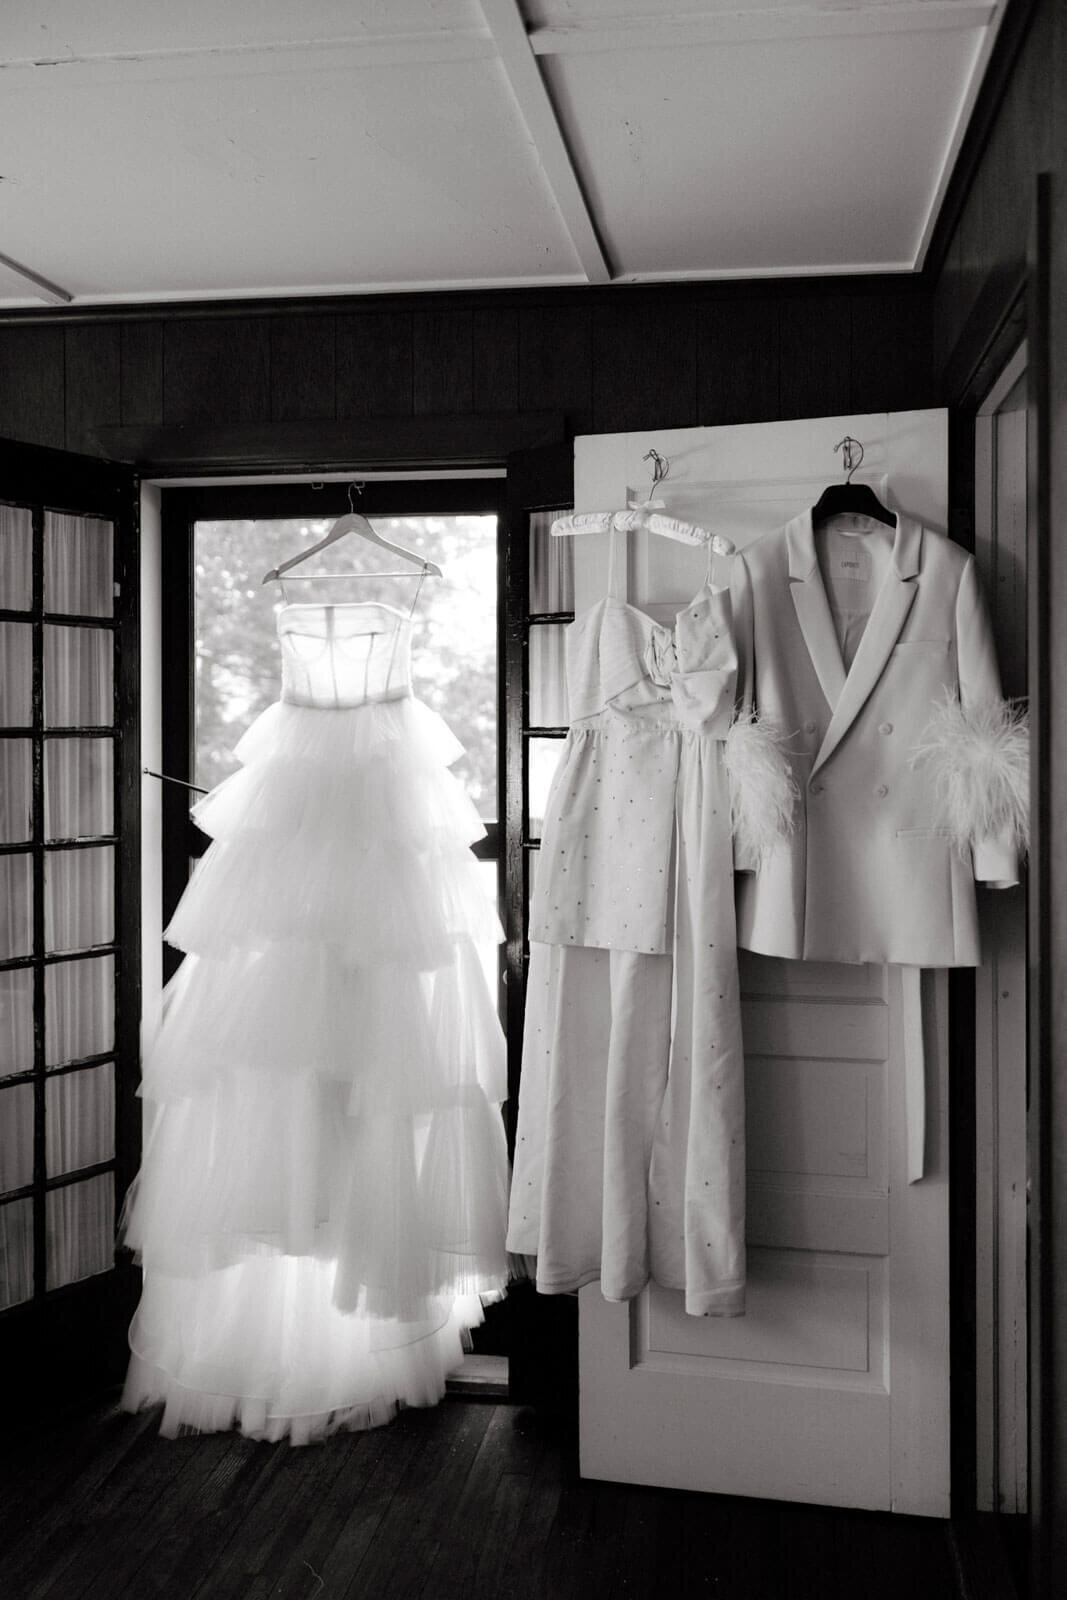 The bride's two wedding dresses are hung in a room at The Ausable Club, New York.